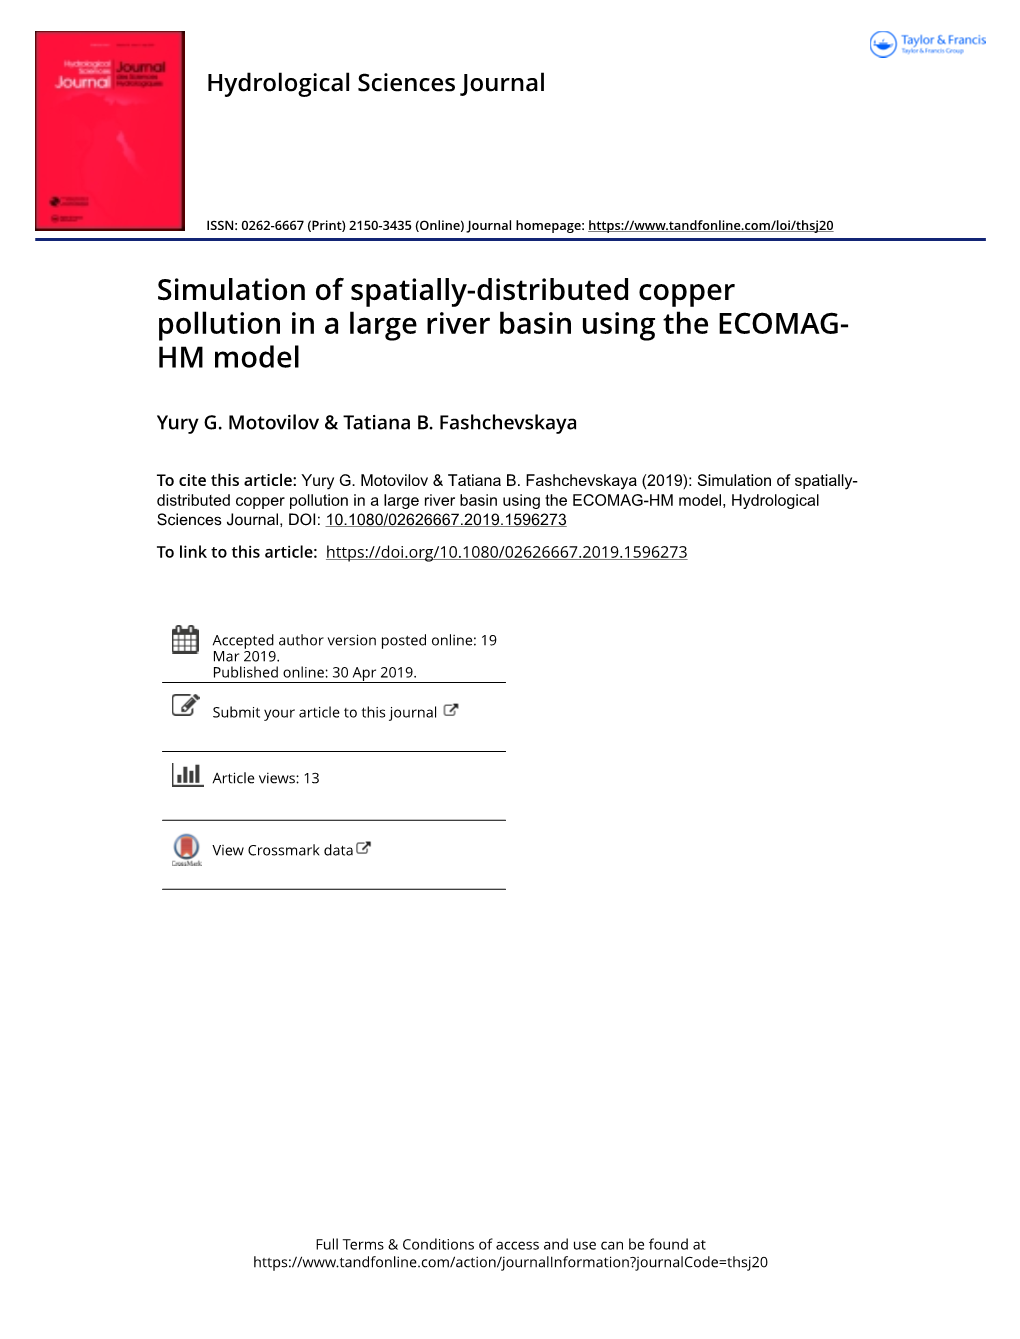 Simulation of Spatially-Distributed Copper Pollution in a Large River Basin Using the ECOMAG- HM Model